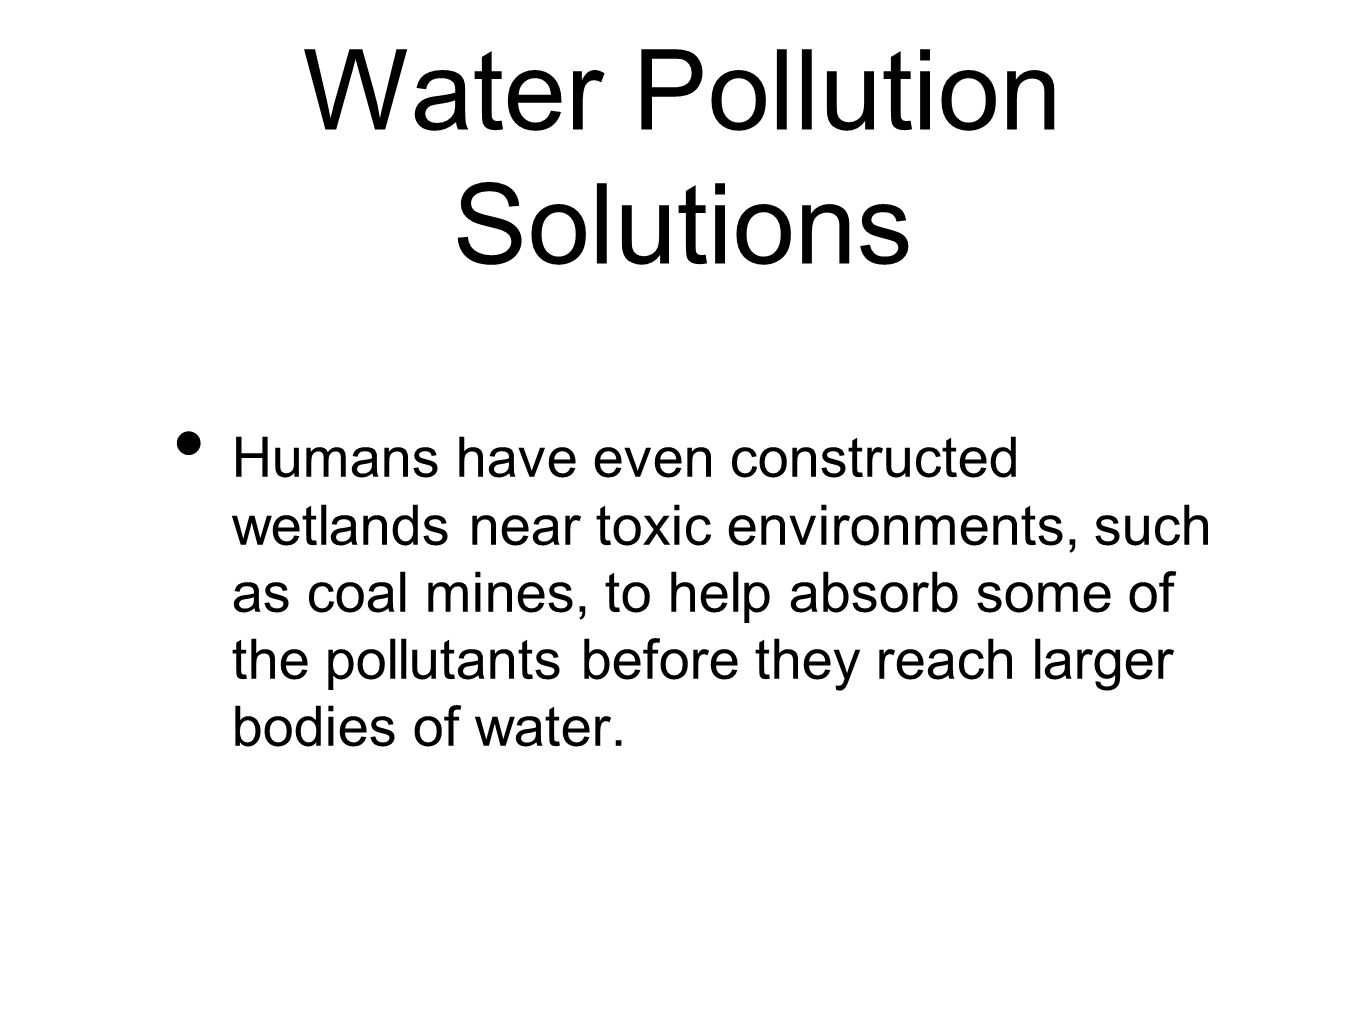 Water Pollution Solutions Humans have even constructed wetlands near toxic environments, such as coal mines, to help absorb some of the pollutants before they reach larger bodies of water.